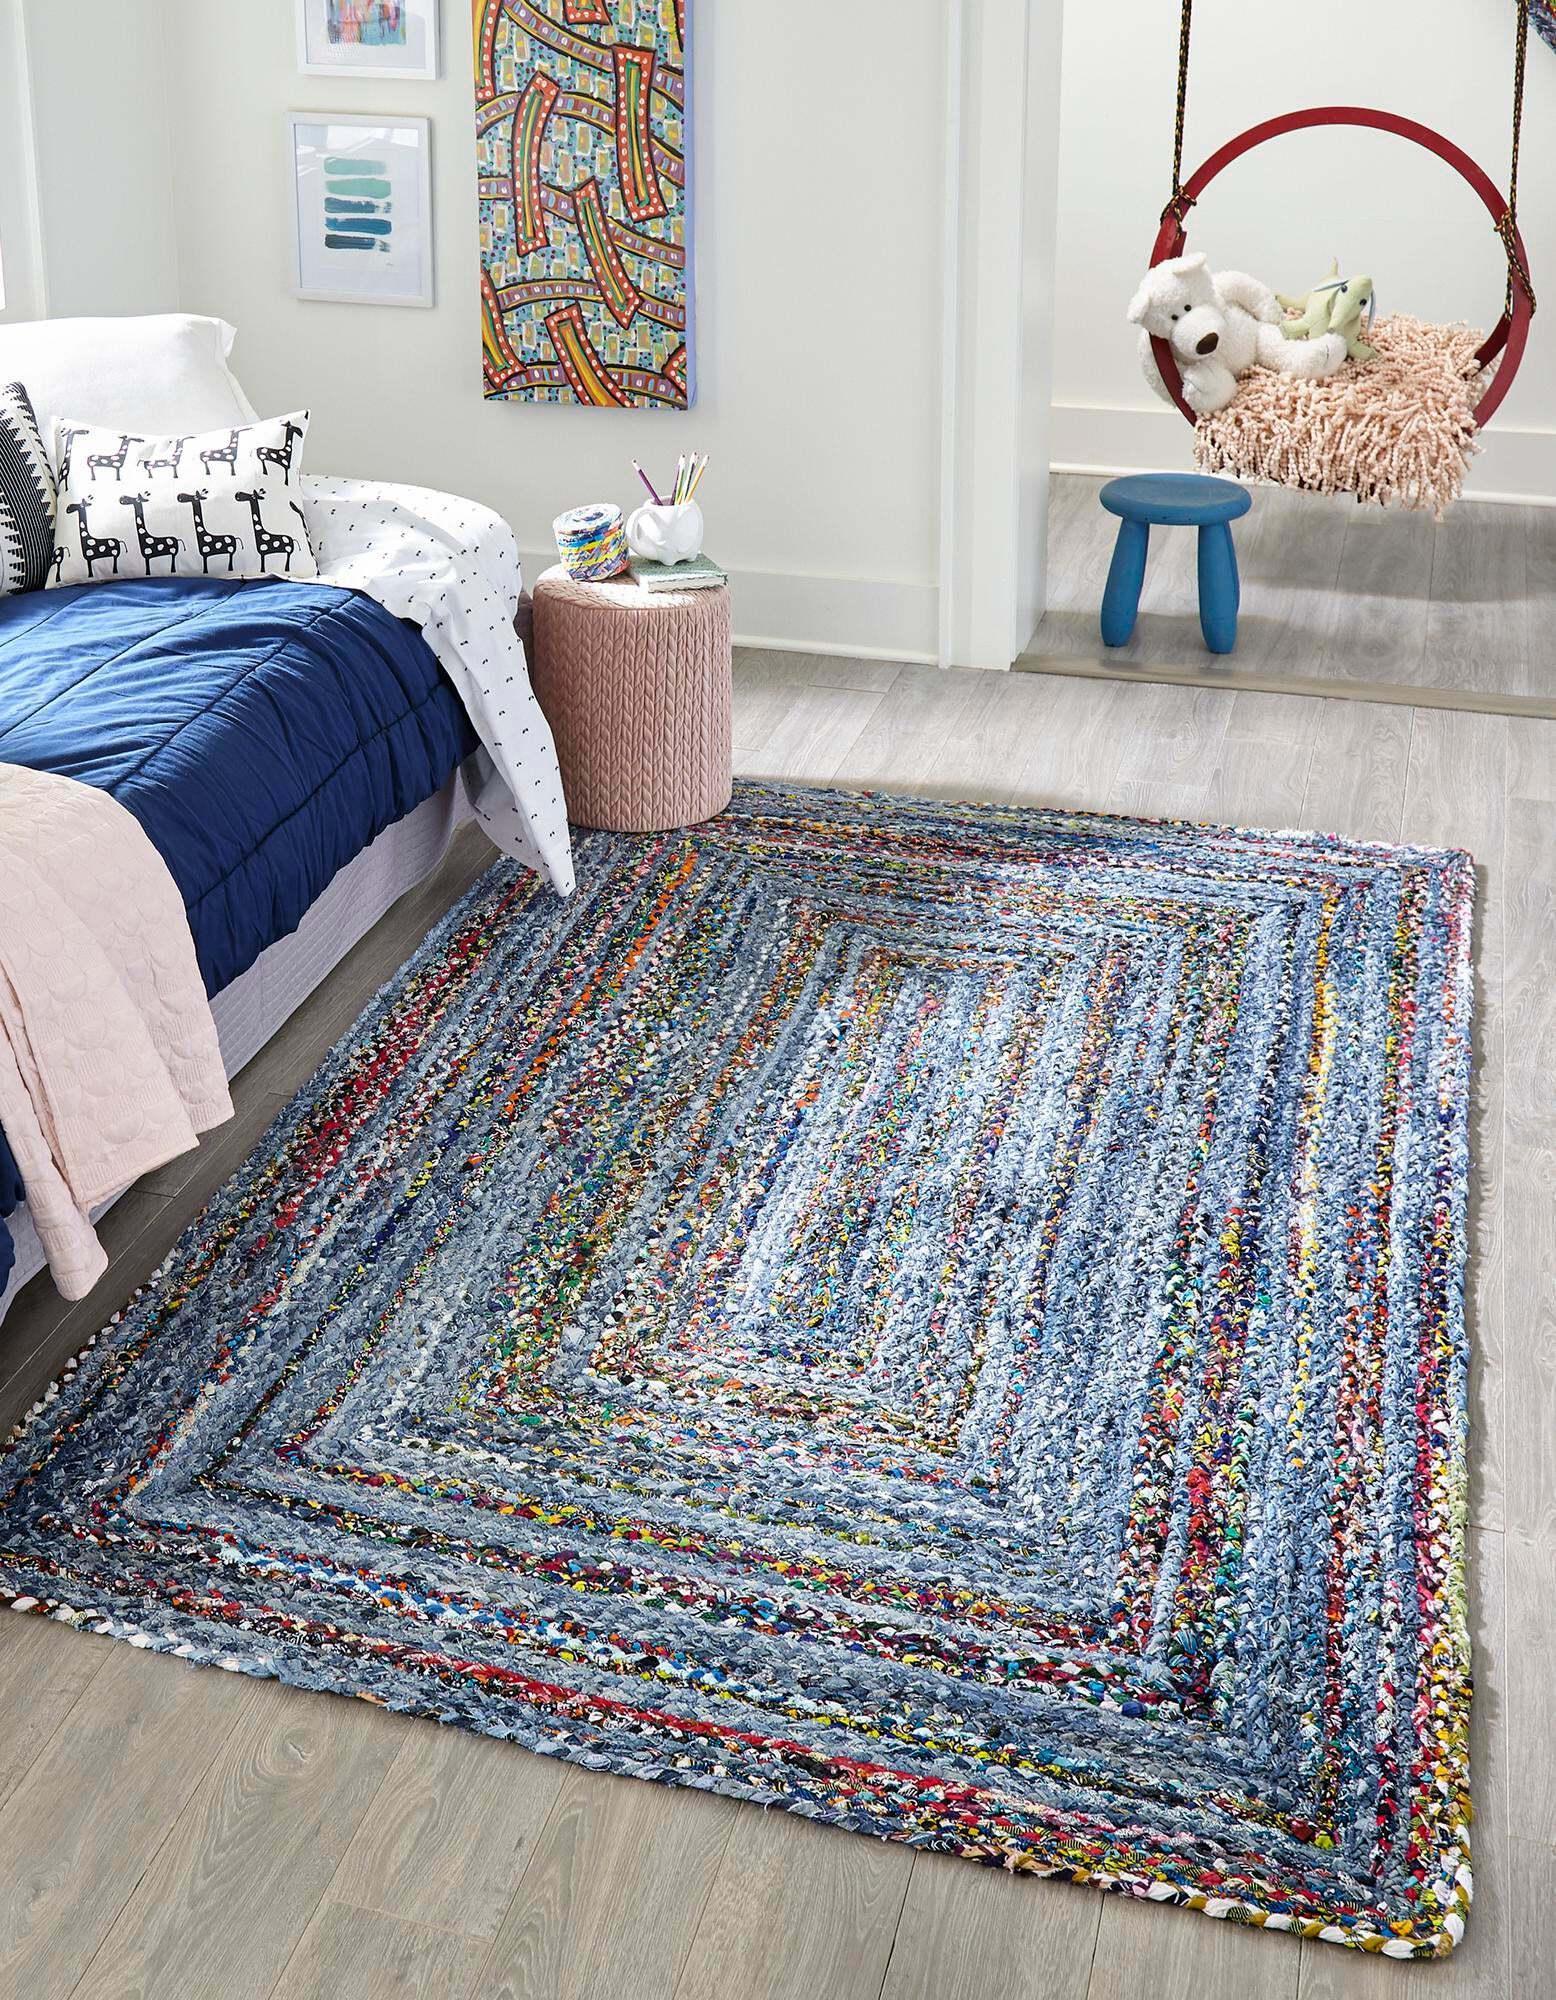 Unique Loom Indoor Rugs - Braided Chindi Abstract Rectangular 8x10 Rug Blue & Multi